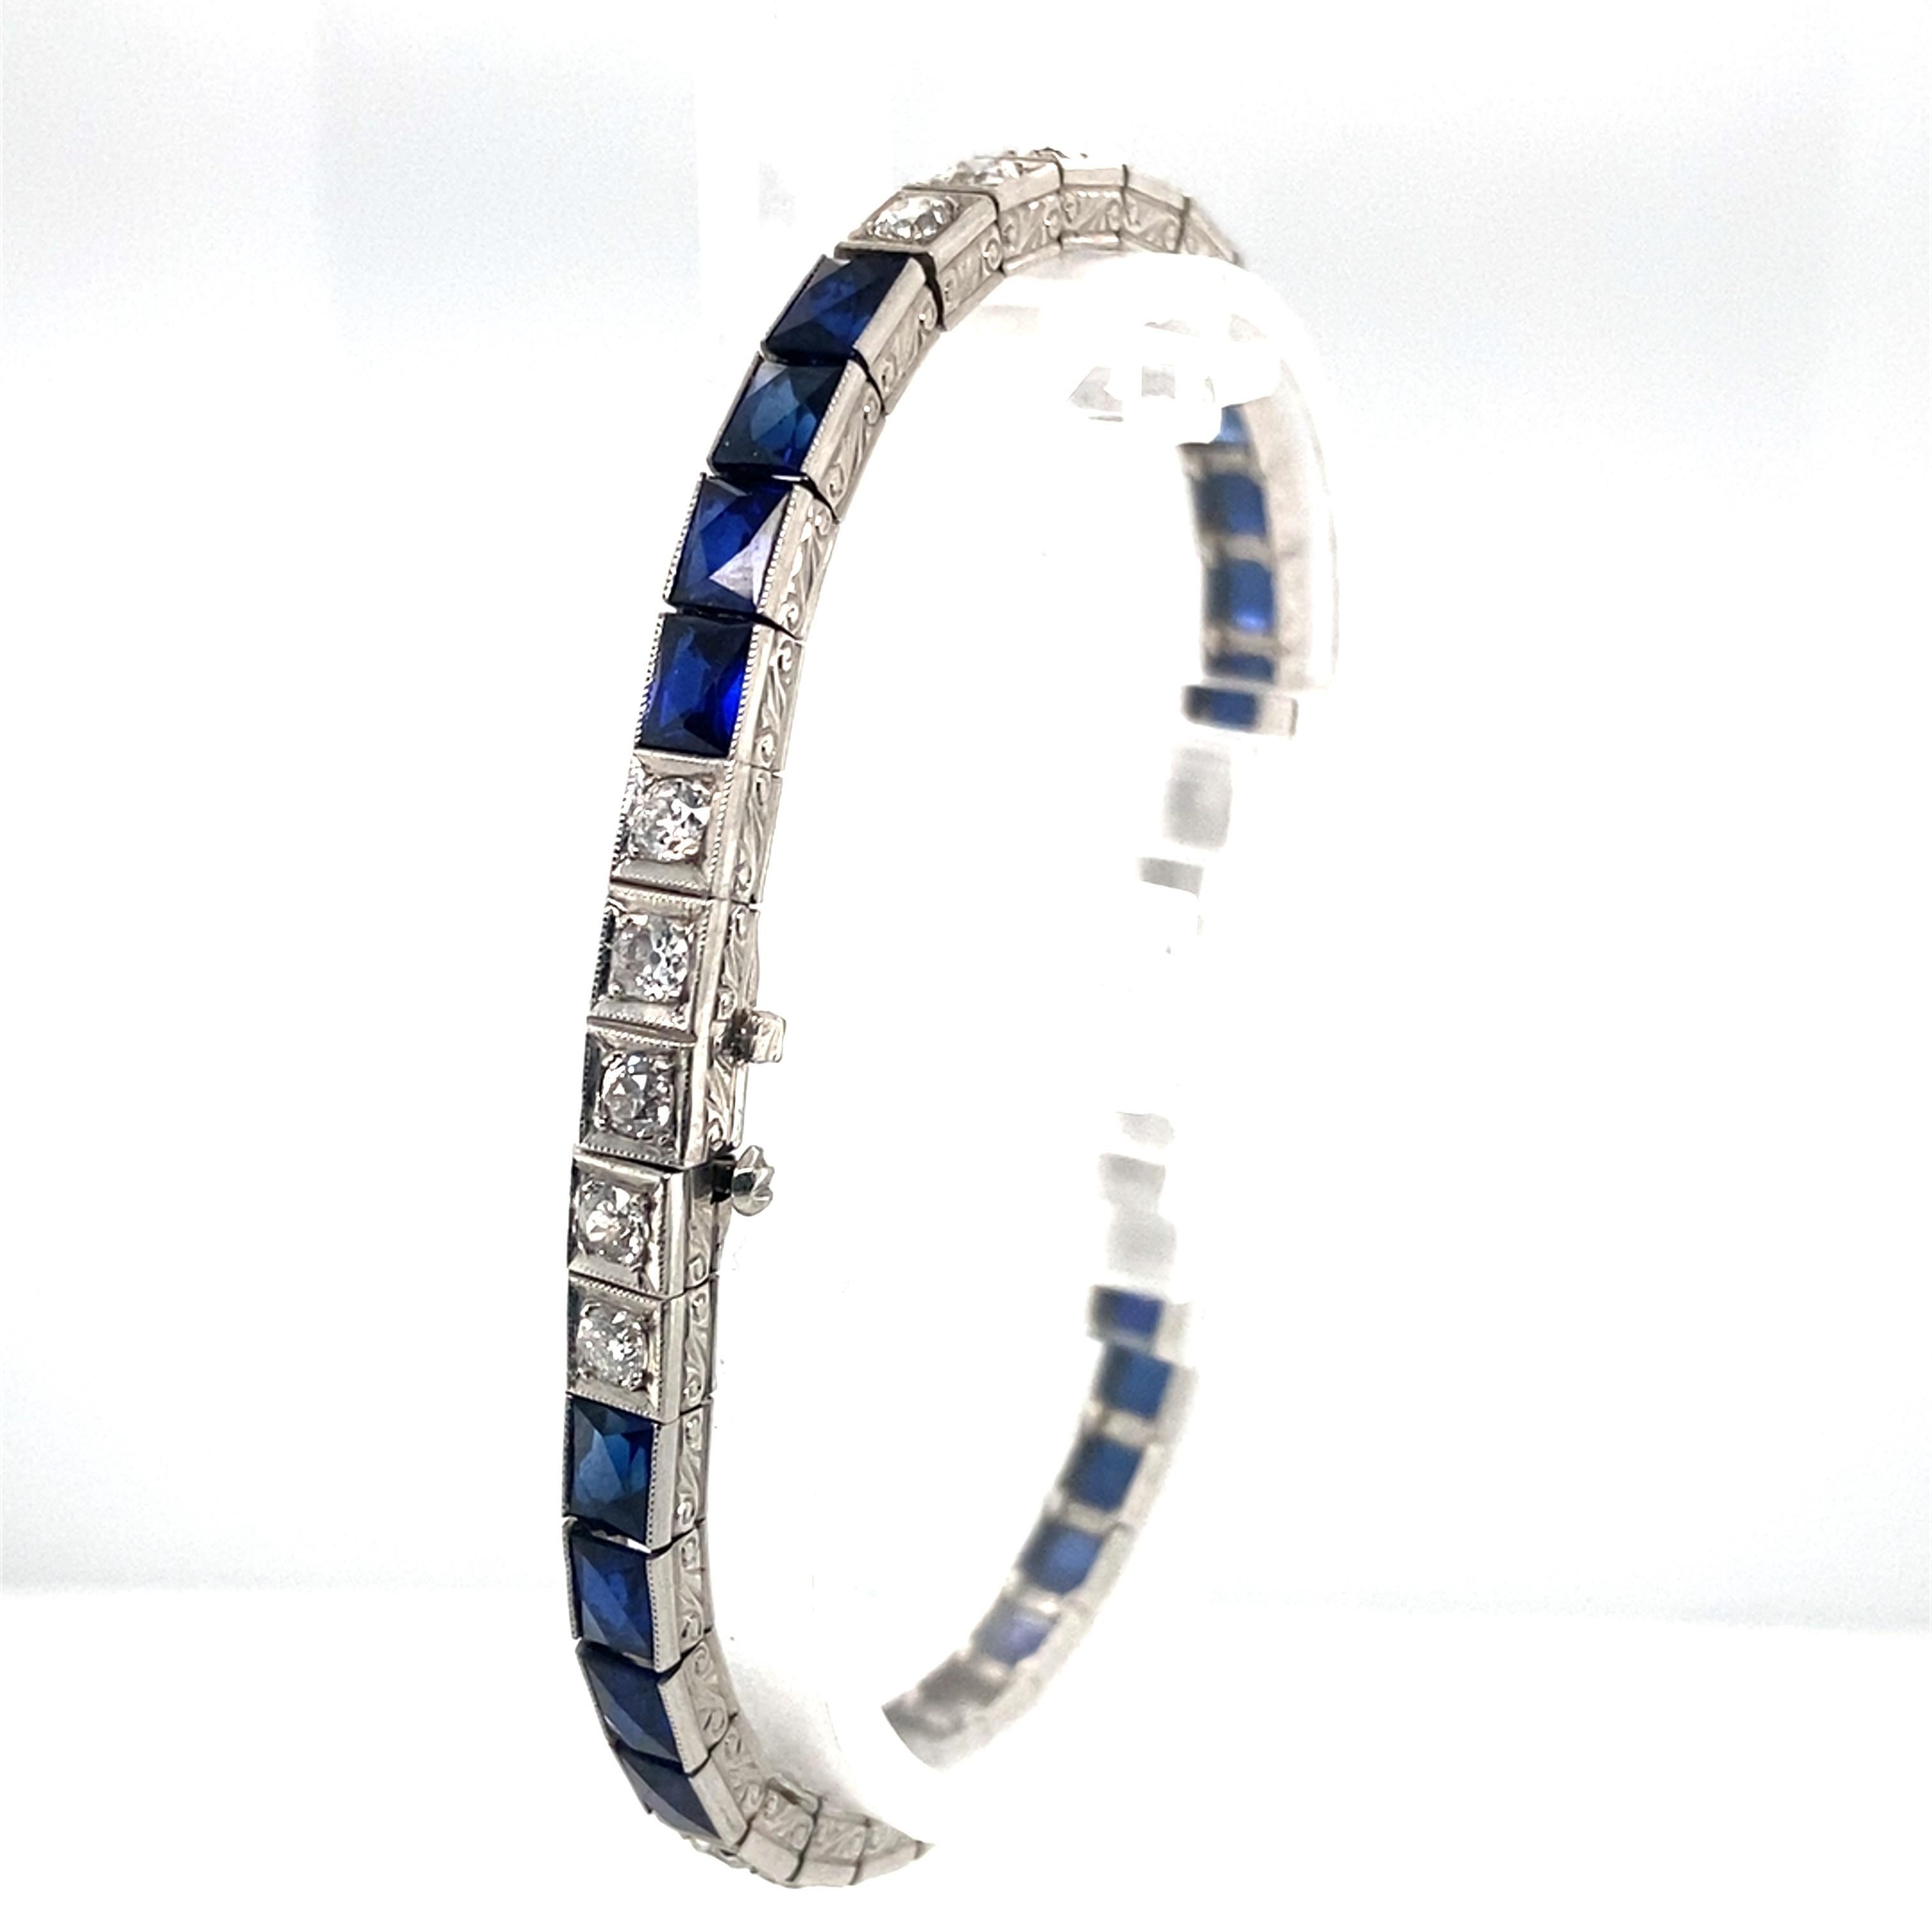 Item Details: 
Metal: Platinum 
Weight: 20.5g
Measurements: 7 inches long 

Diamond Details:
Cut: Old European Cut 
Carat: 3 carat total weight 
Color: H
Clarity: VS-SI 

Blue Glass Details:
Cut: French cut 
Color: Blue 

Item Features:
This